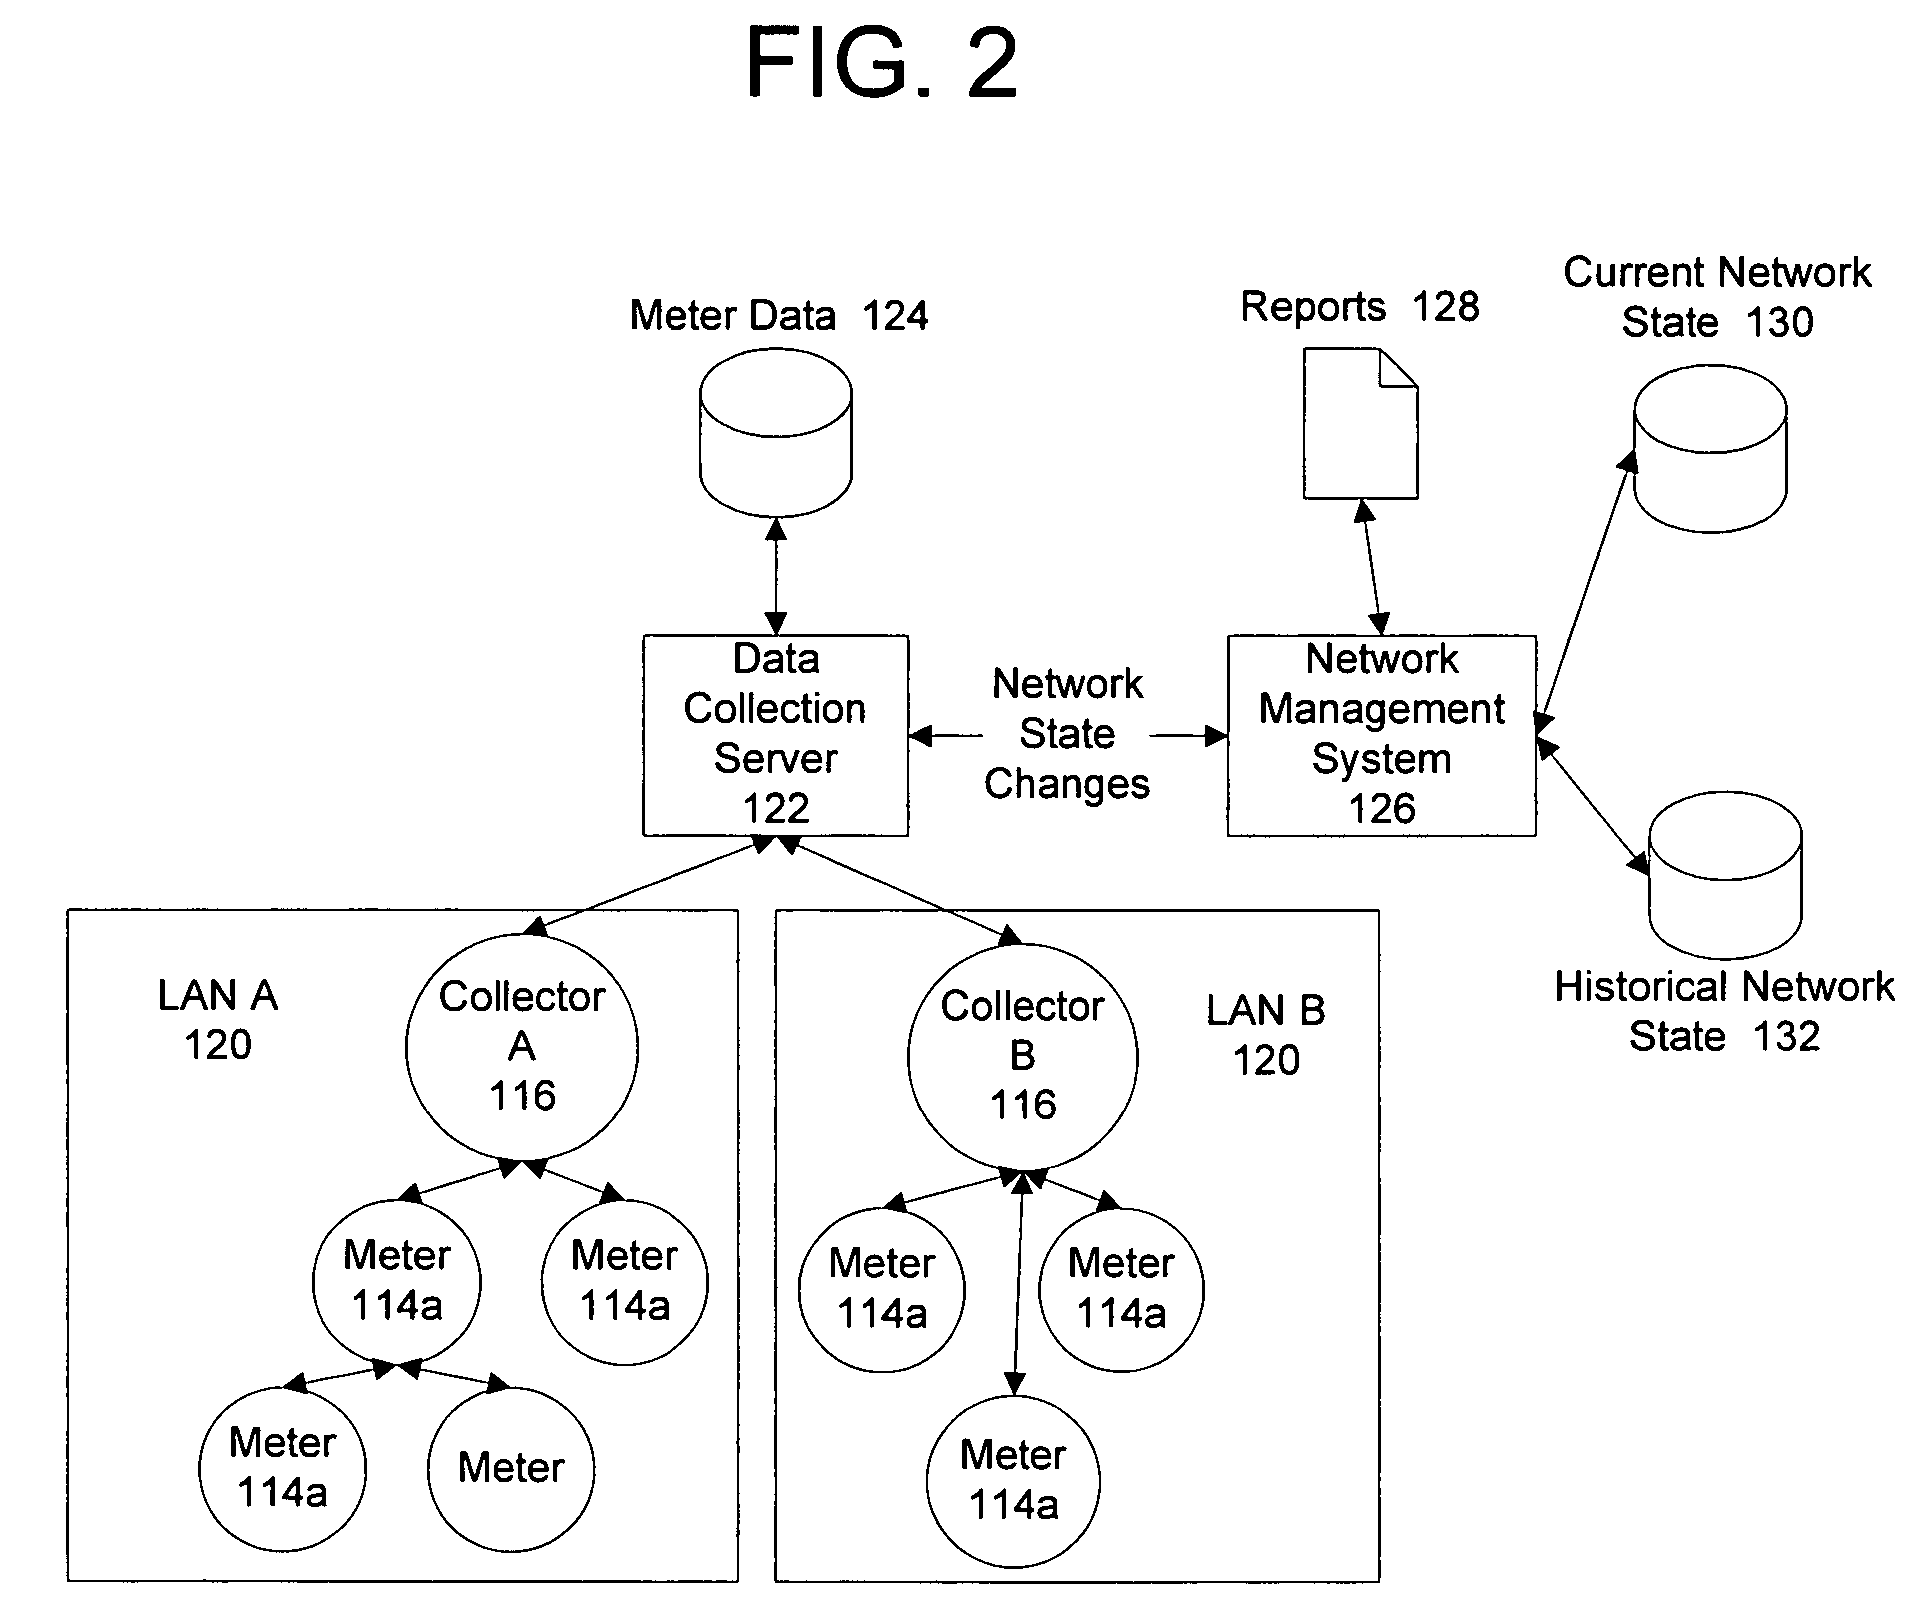 System and method of visualizing network layout and performance characteristics in a wireless network